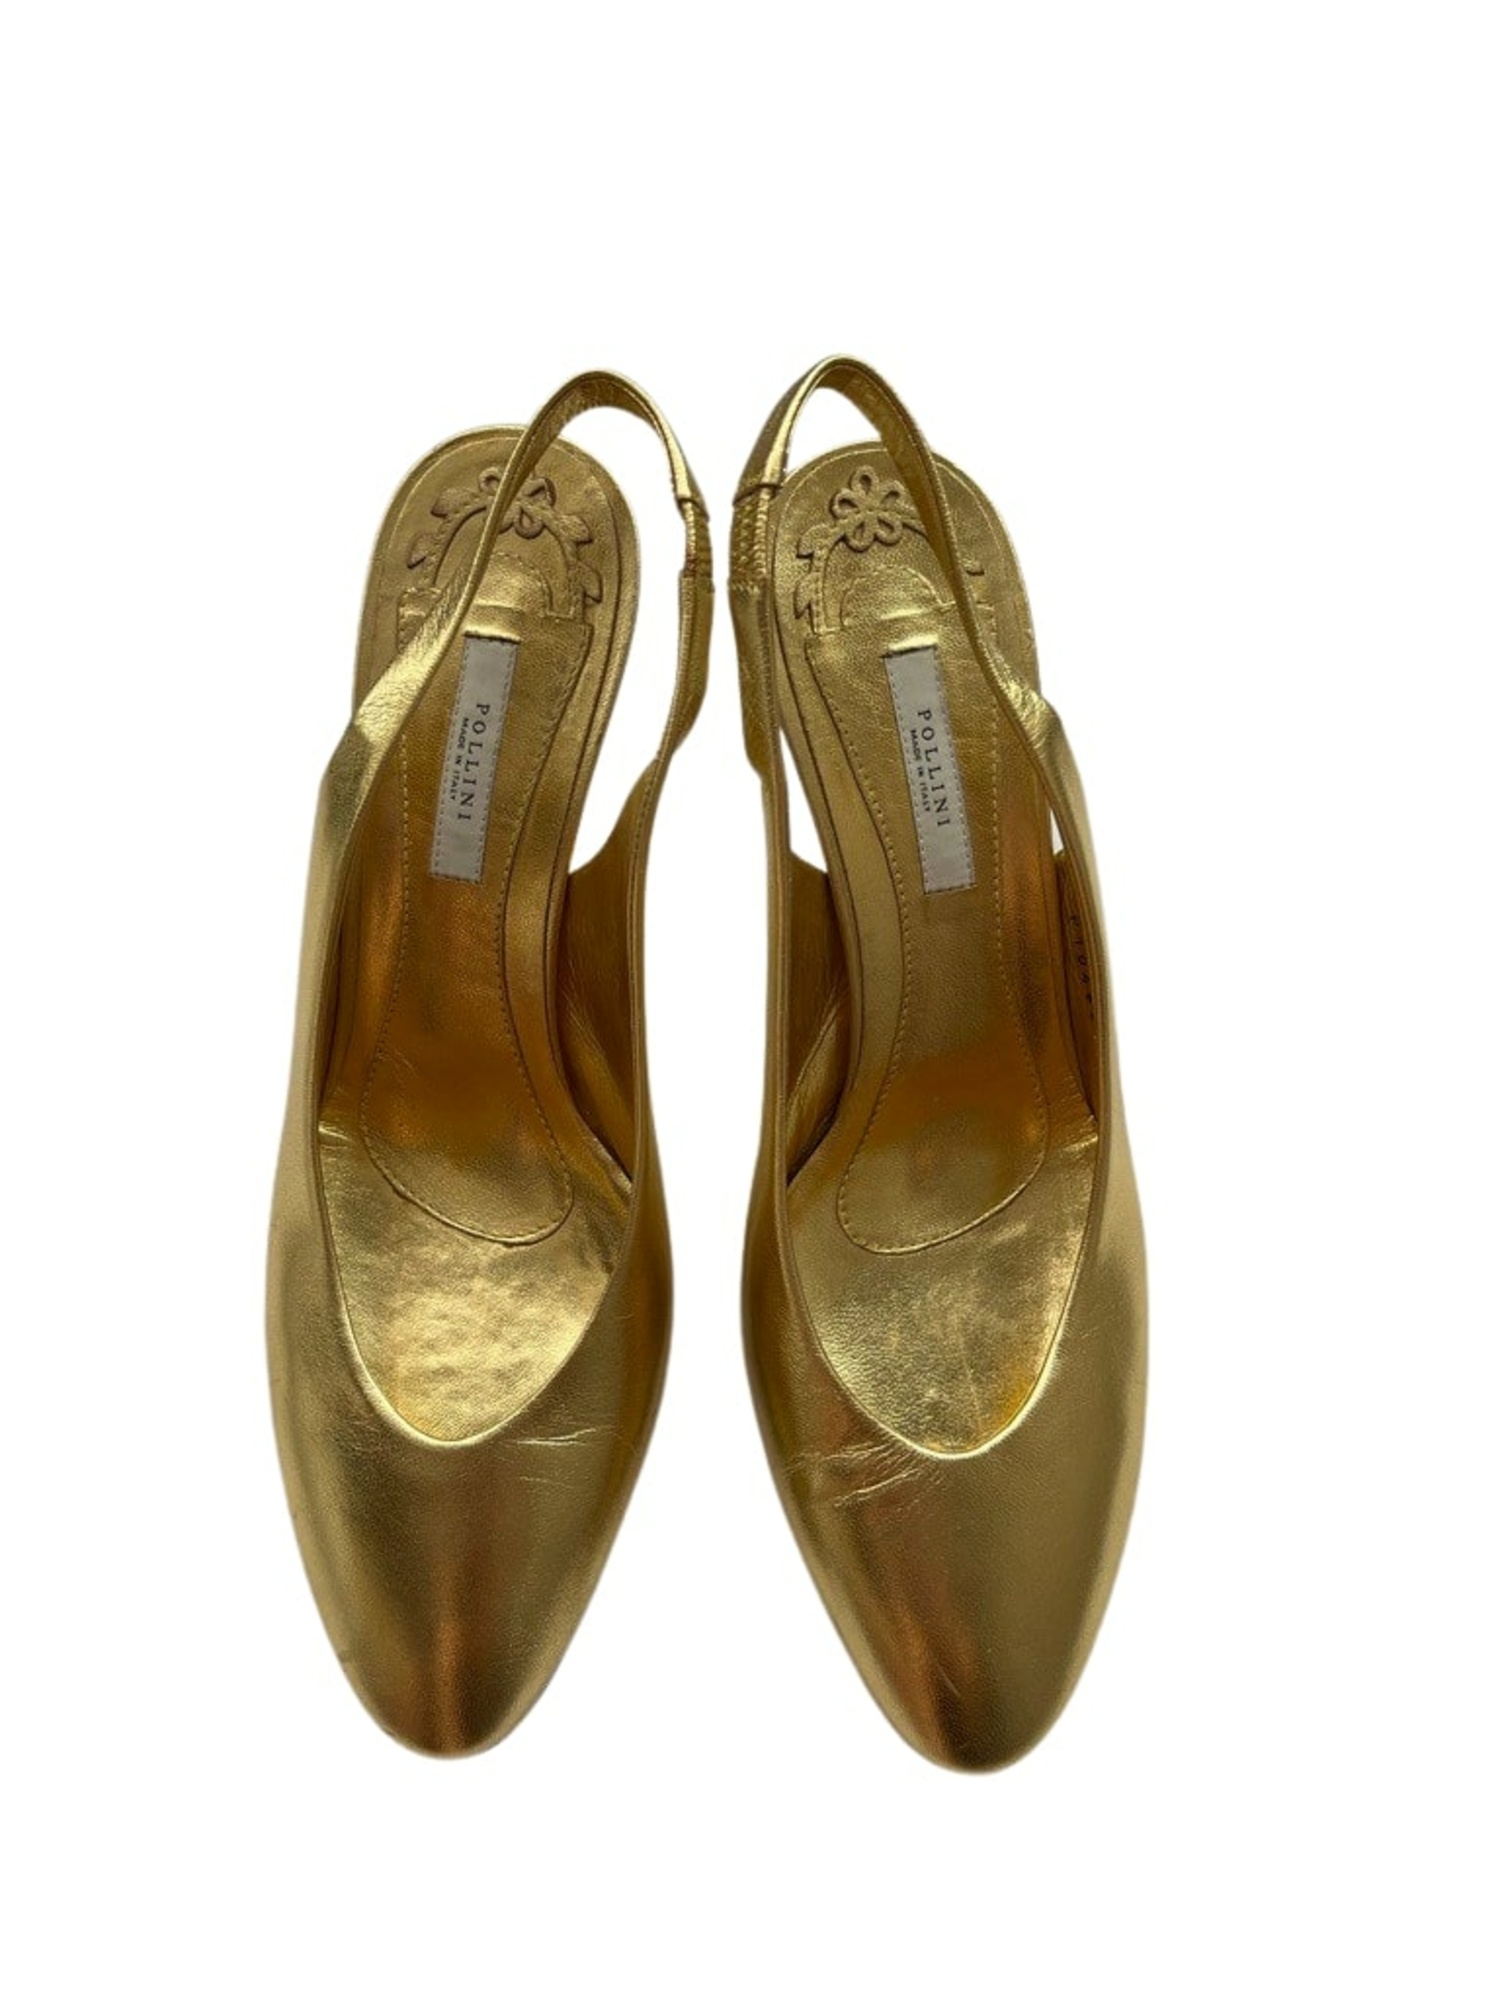 Gold leather slingback shoes Studio Pollini - 40, buy pre-owned at 75 EUR